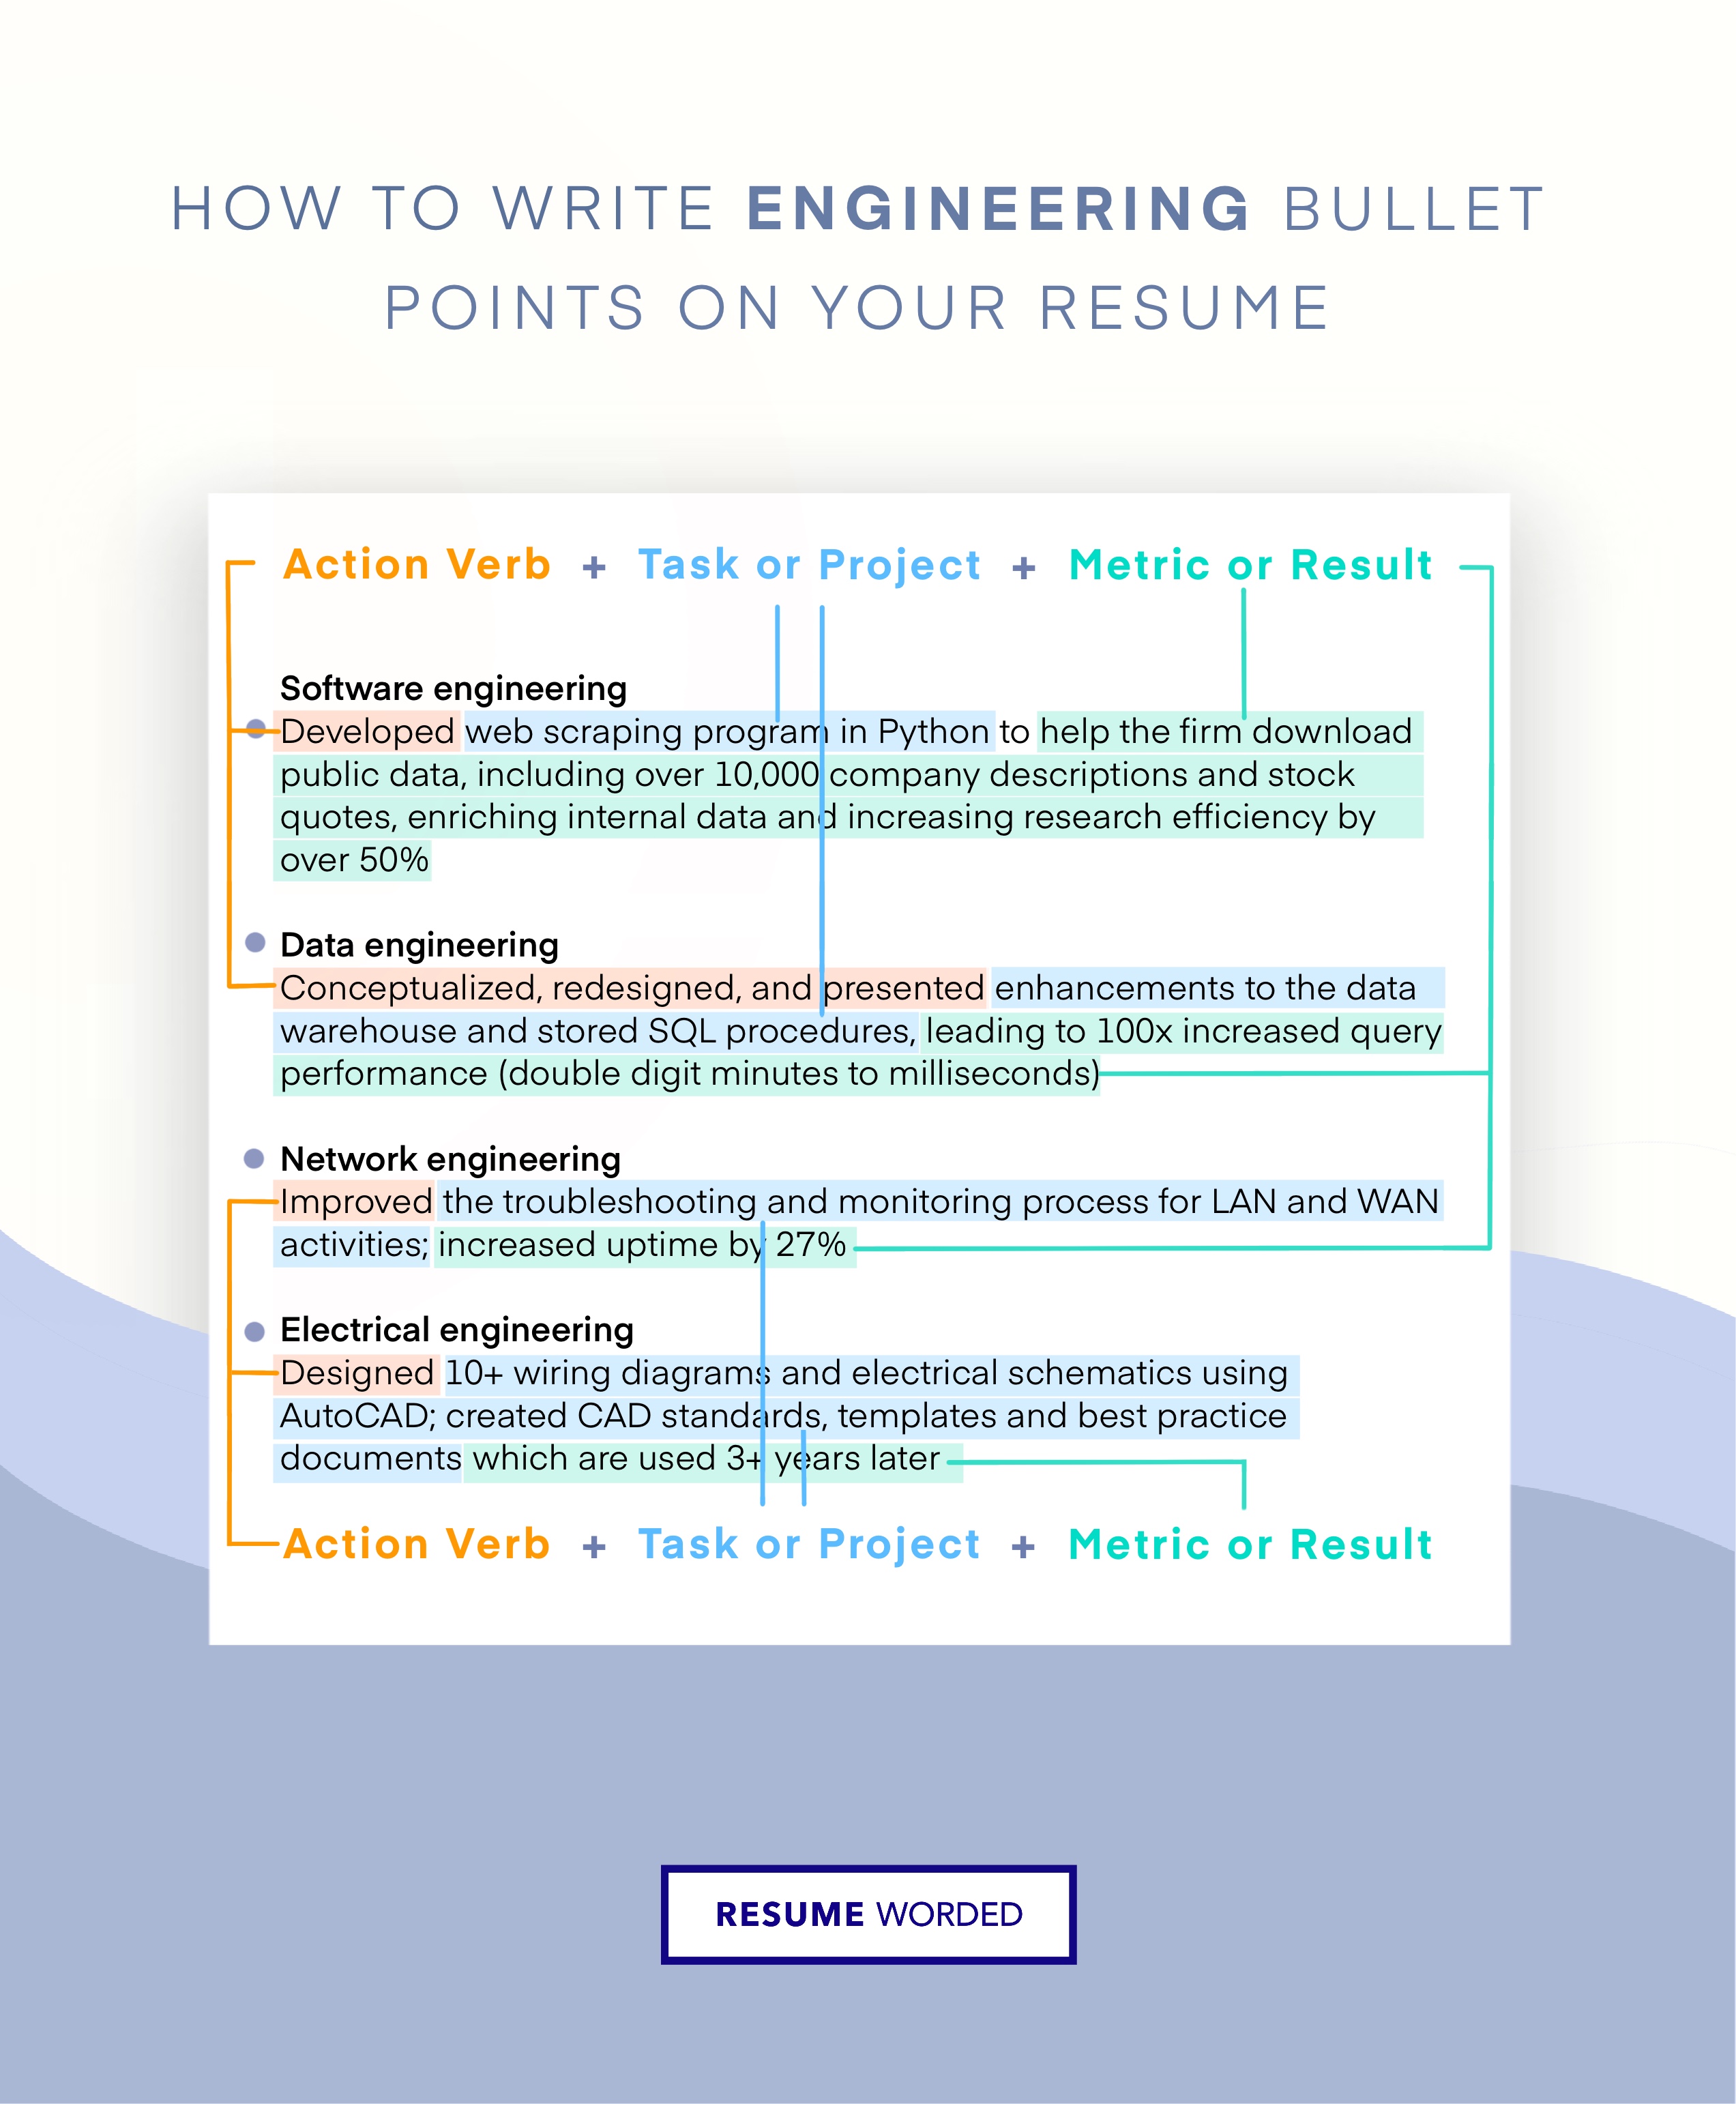 University projects relevant to civil engineering - Civil Engineer Resume